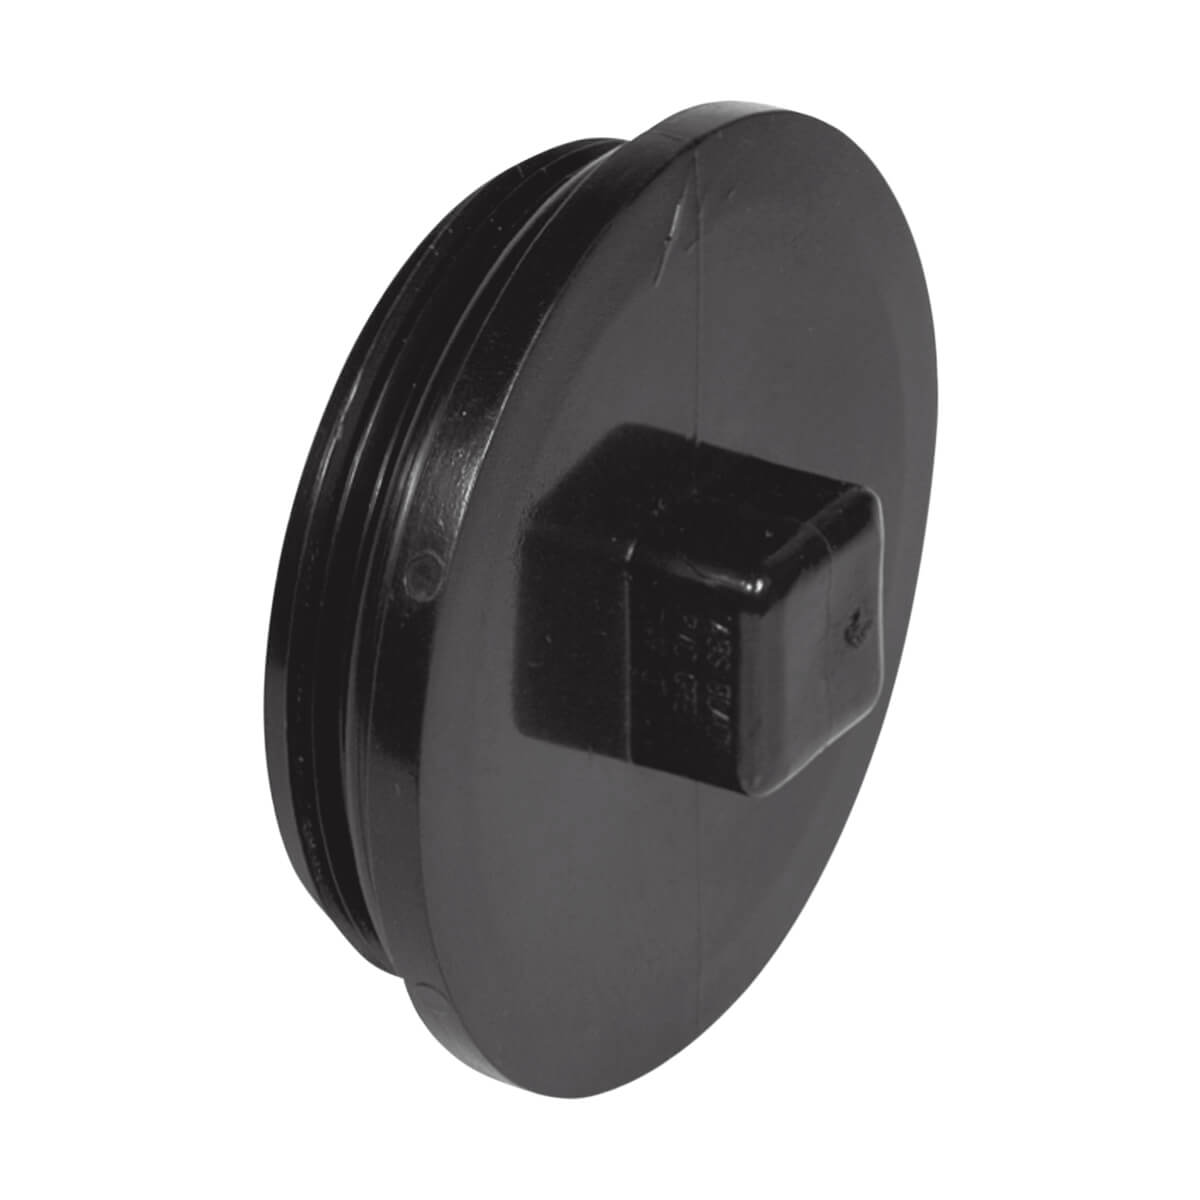 ABS-DWV Cleanout Plug - MPT - 4-in